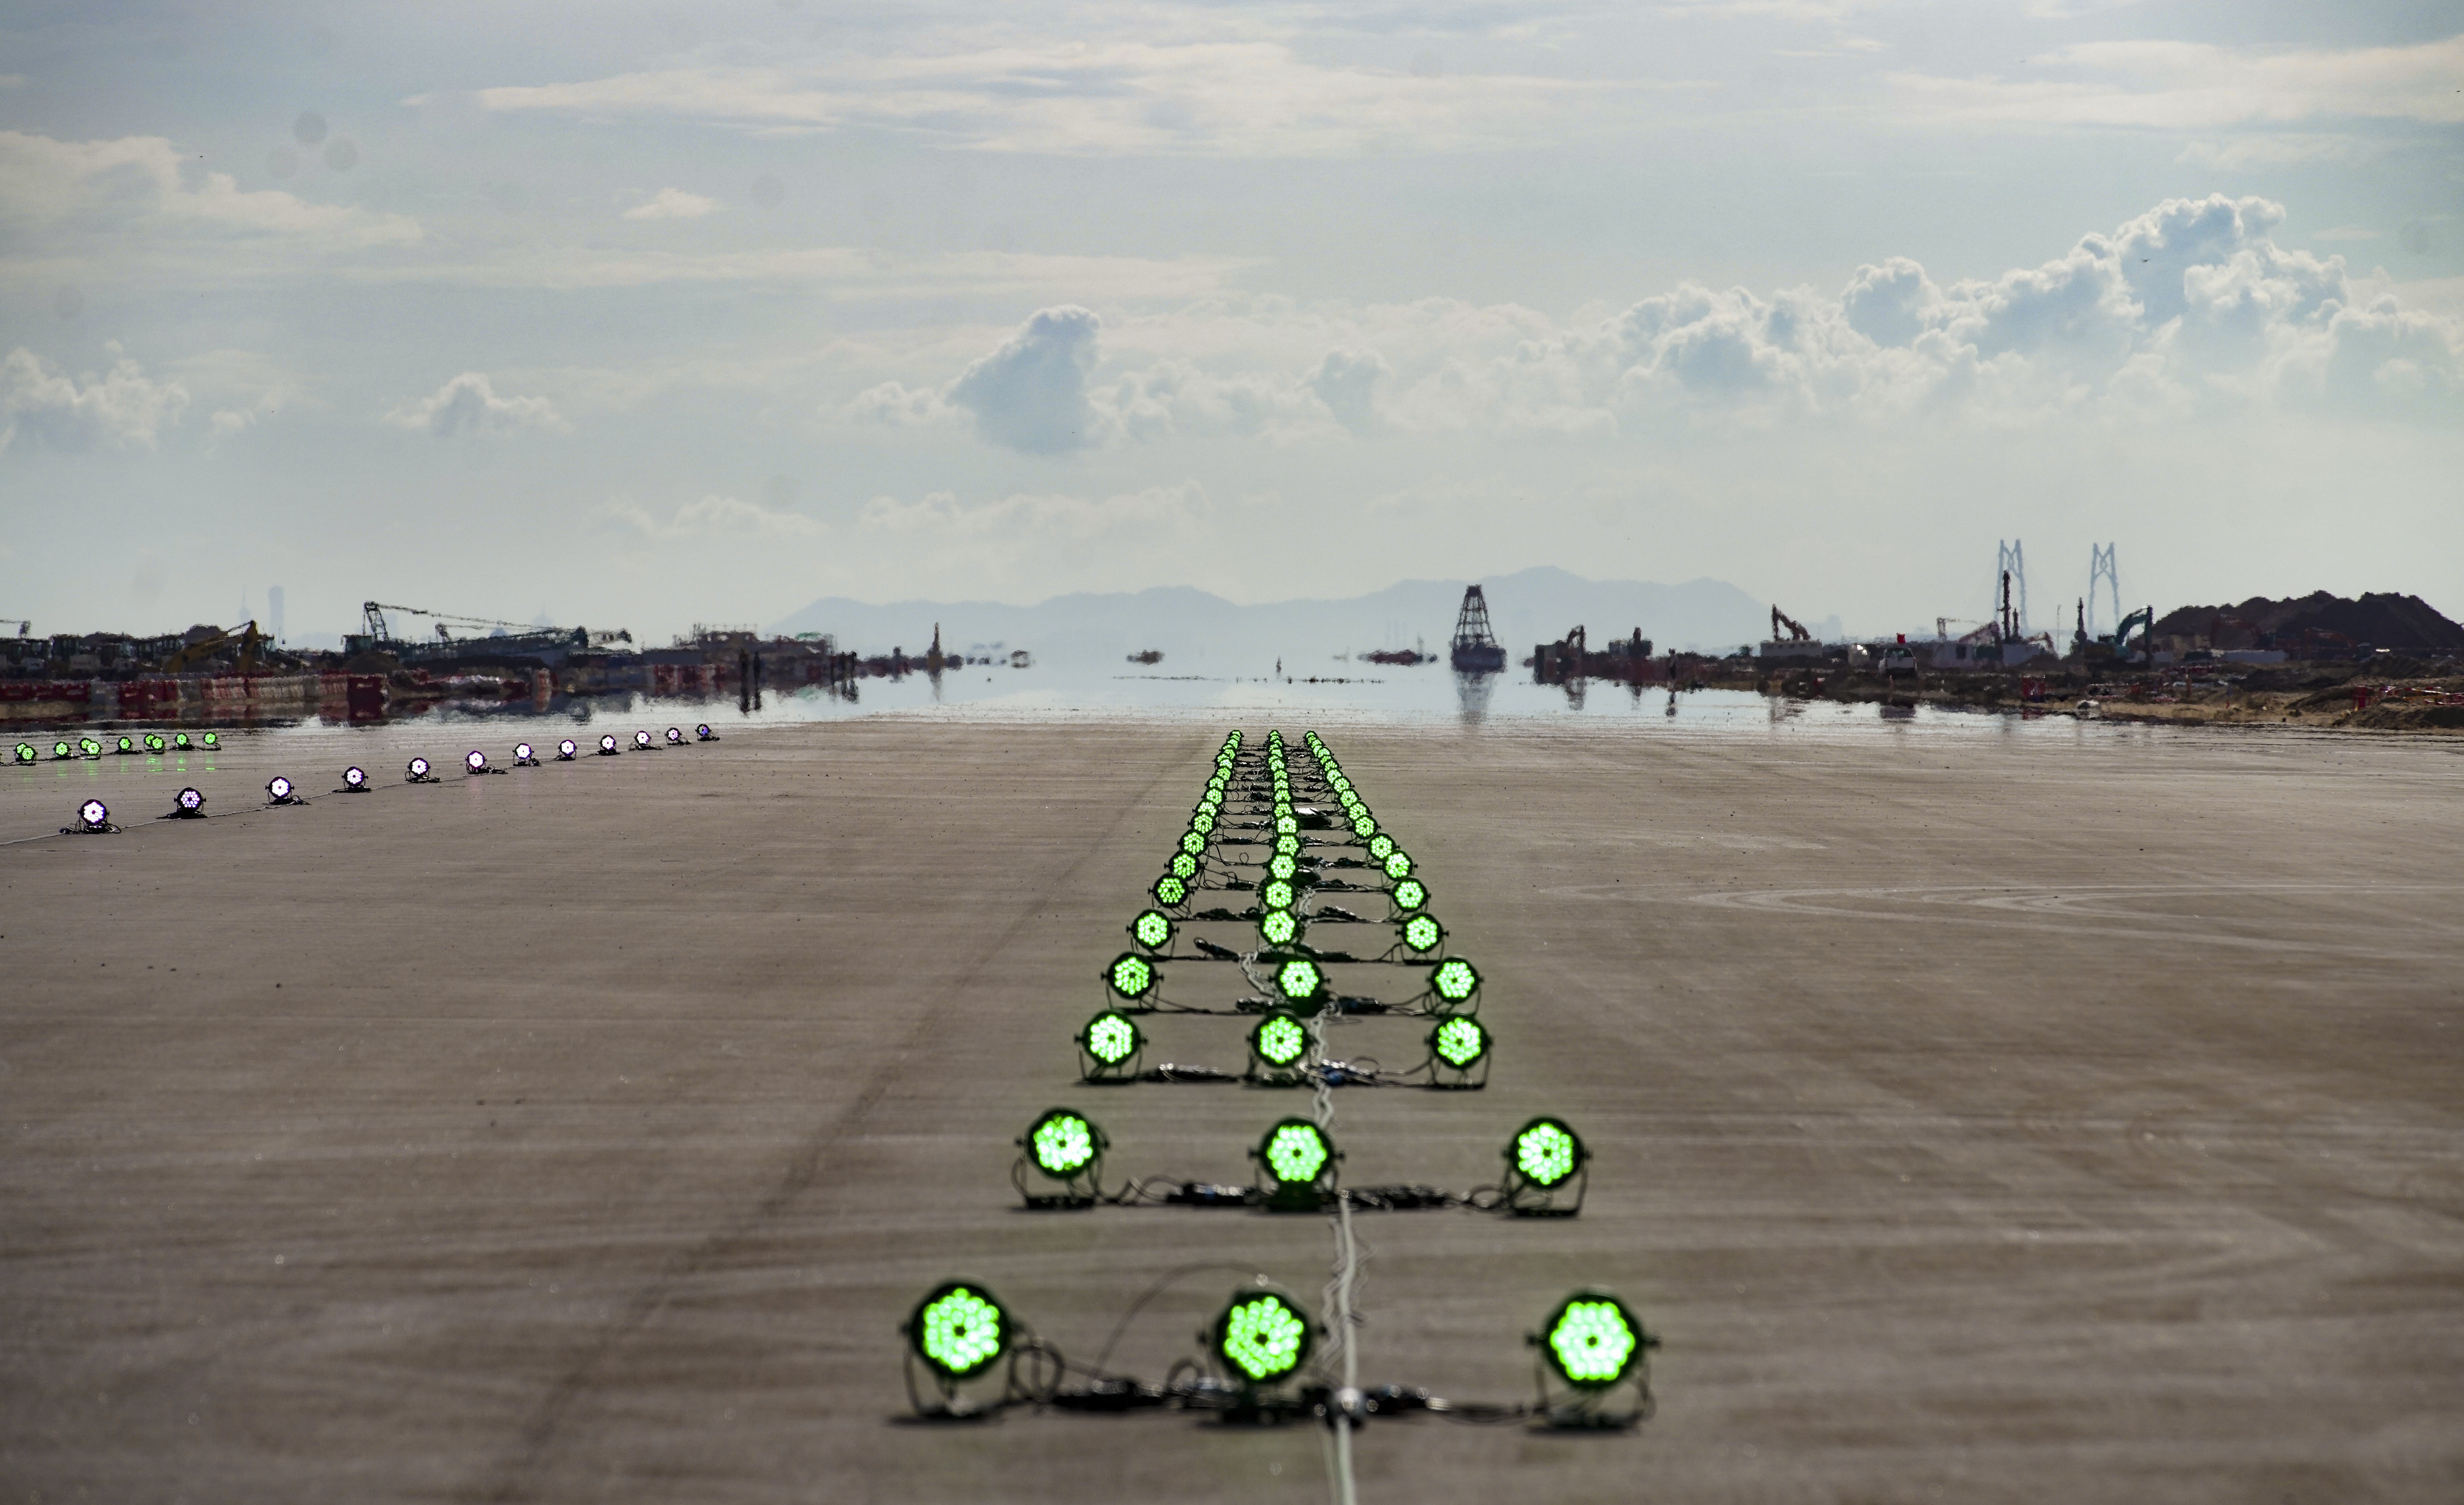 The third runway features some 14,000 ground lights to help guide pilots. Photo: Winson Wong